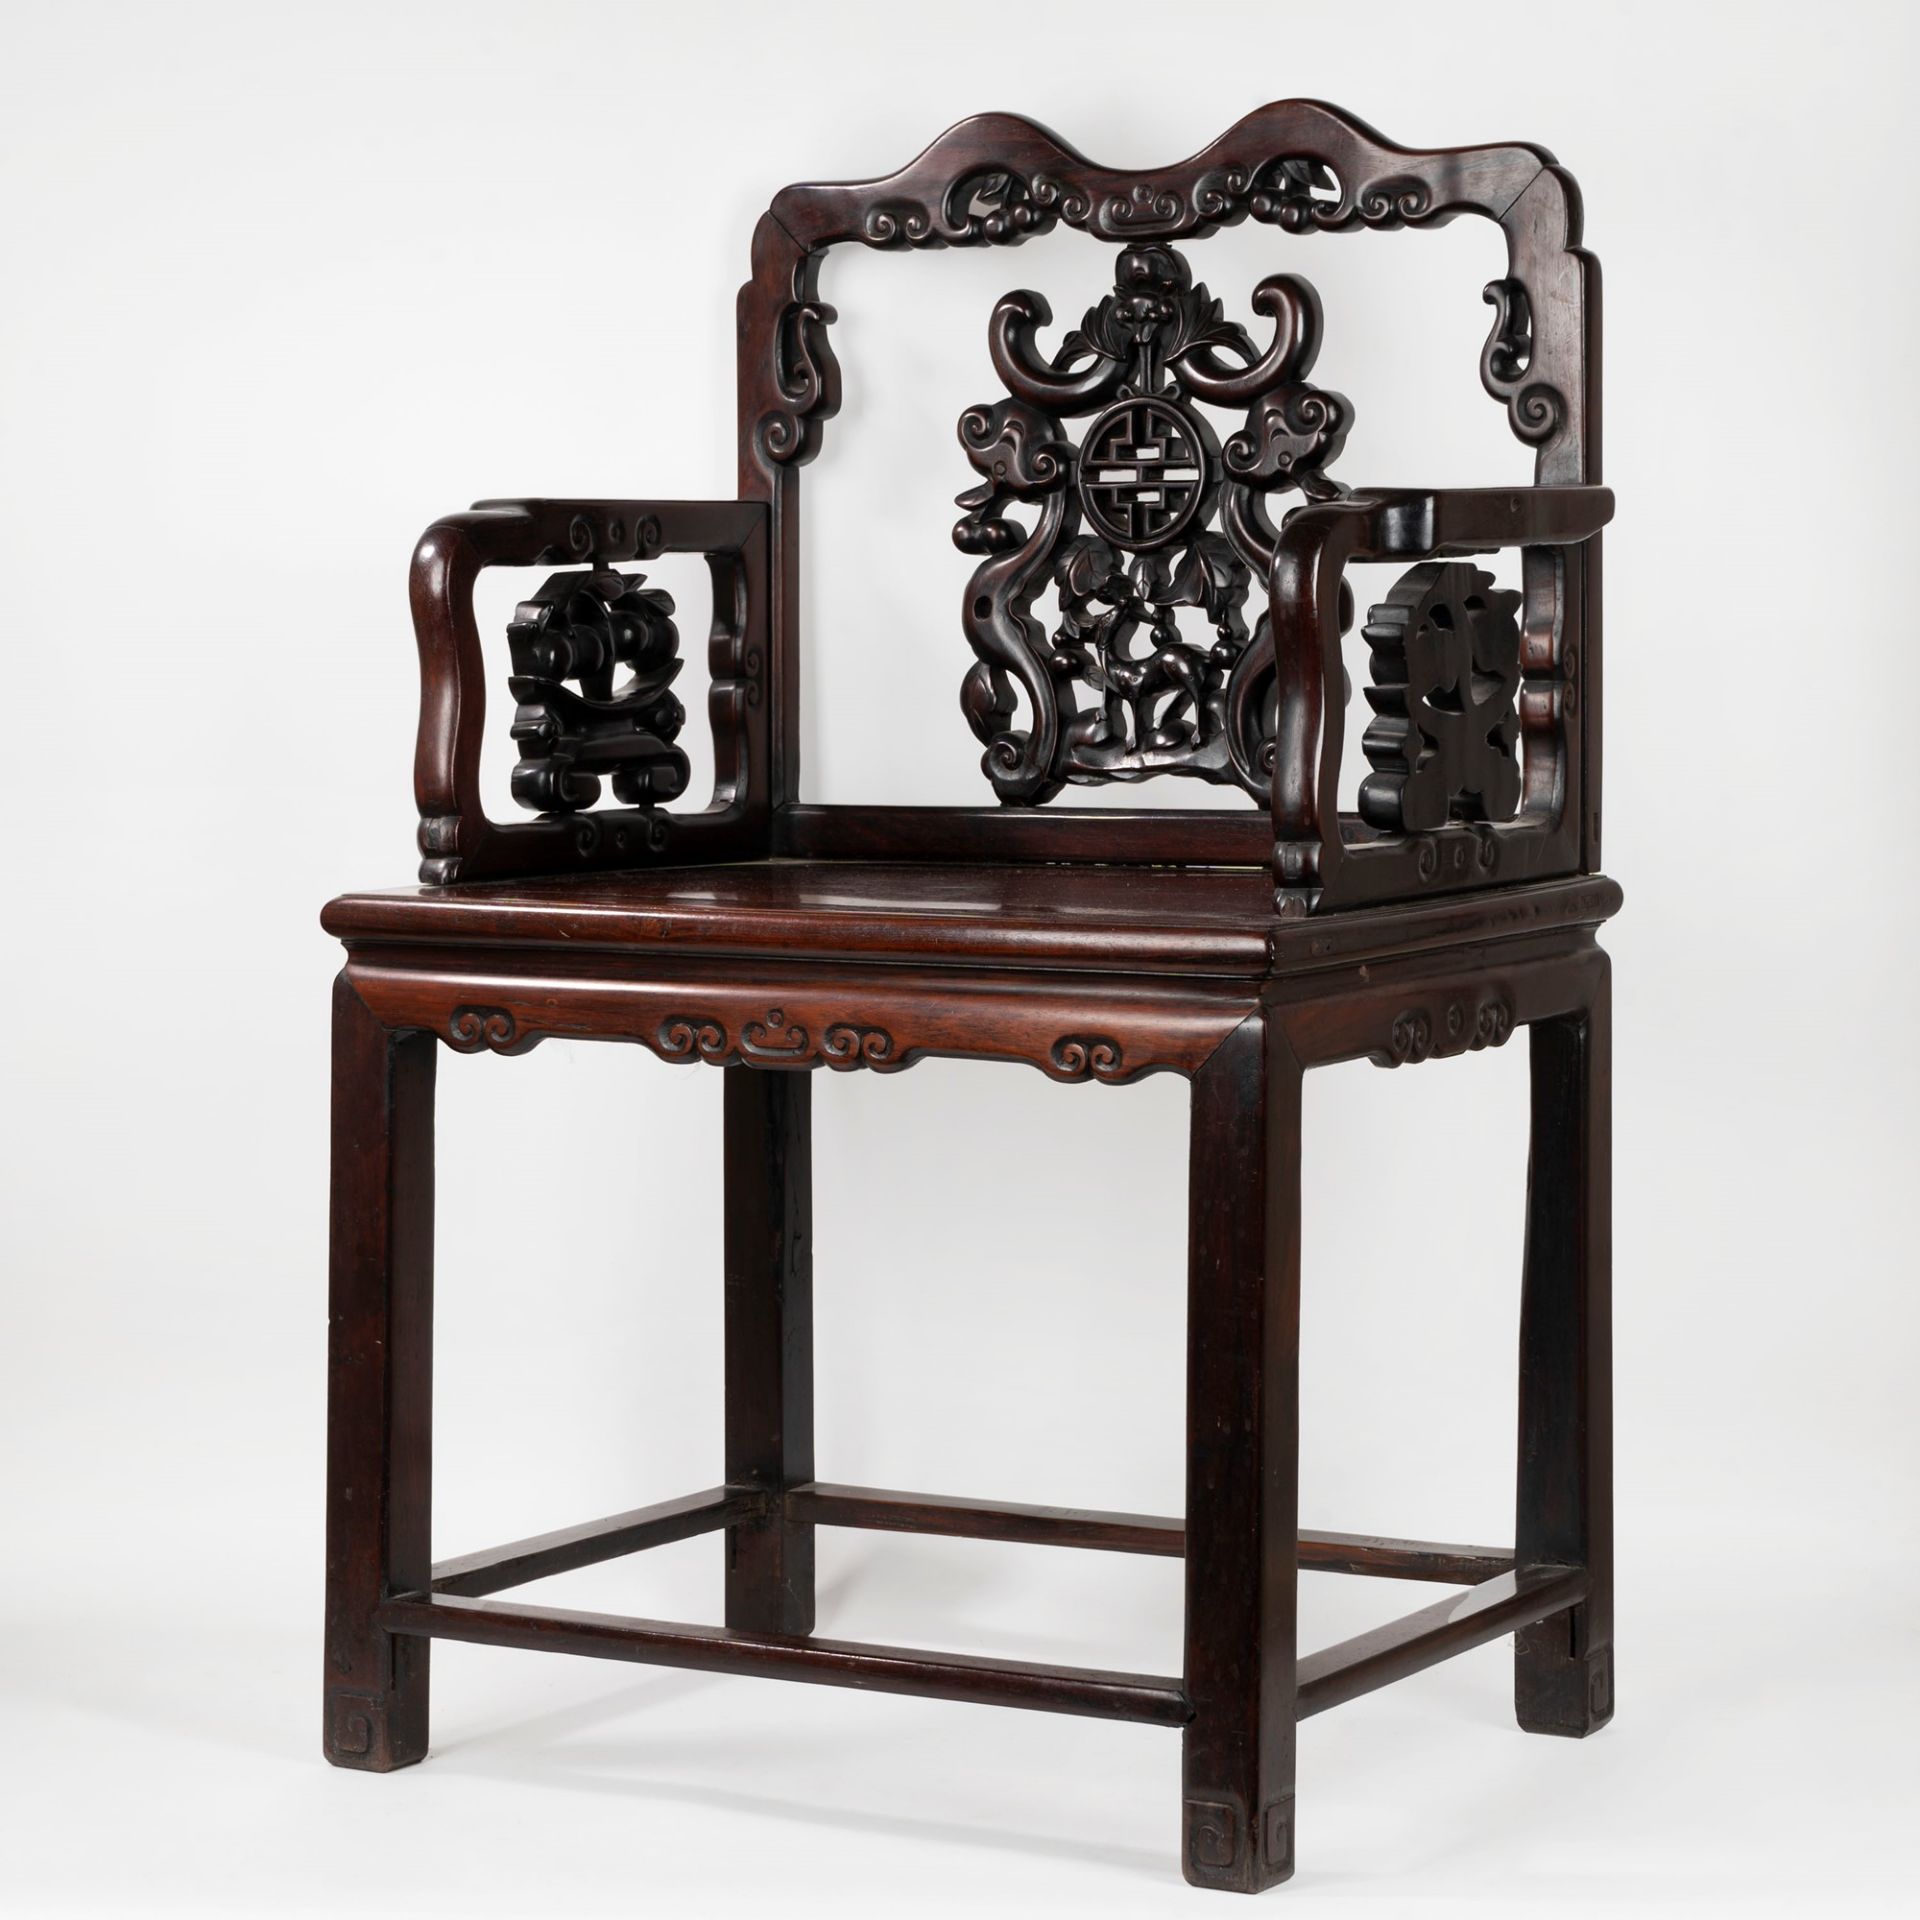 Pair of armchairs and a carved wooden table in oriental style, 20th century - Image 3 of 7